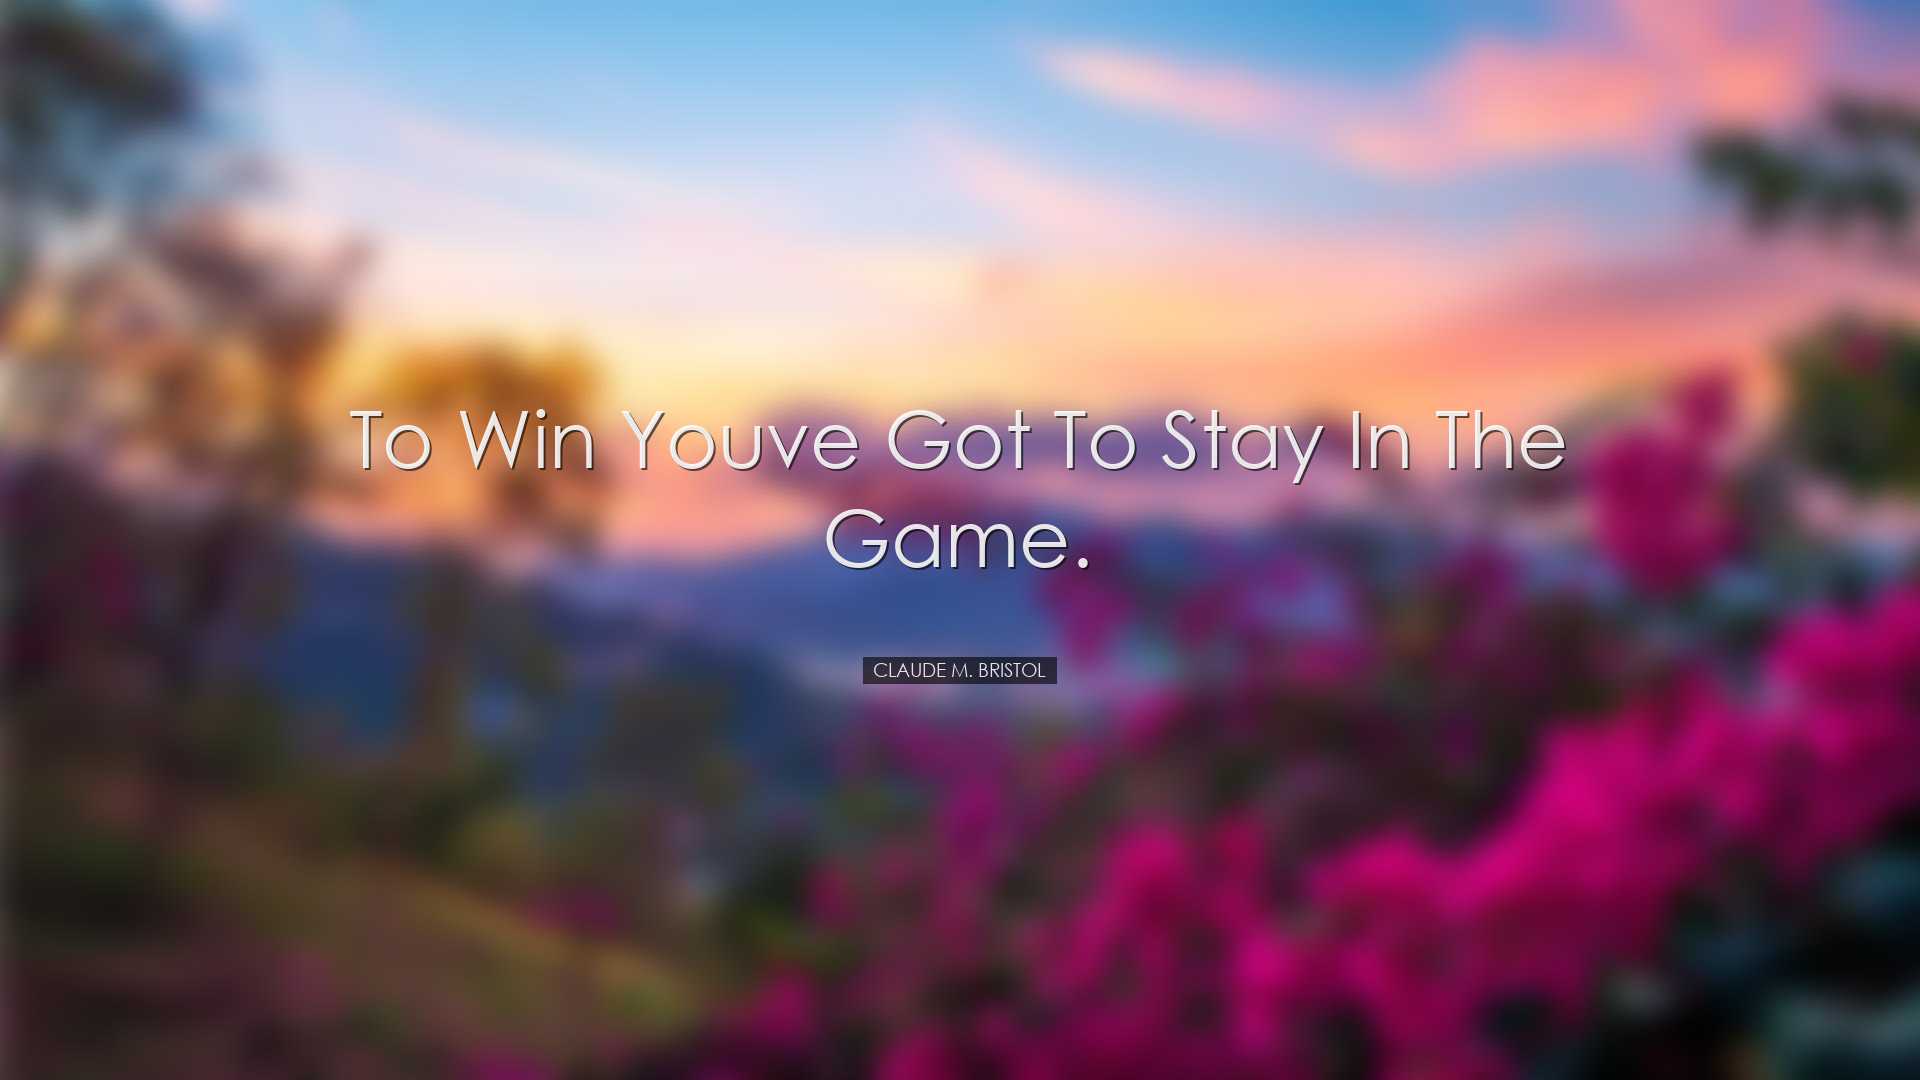 To win youve got to stay in the game. - Claude M. Bristol